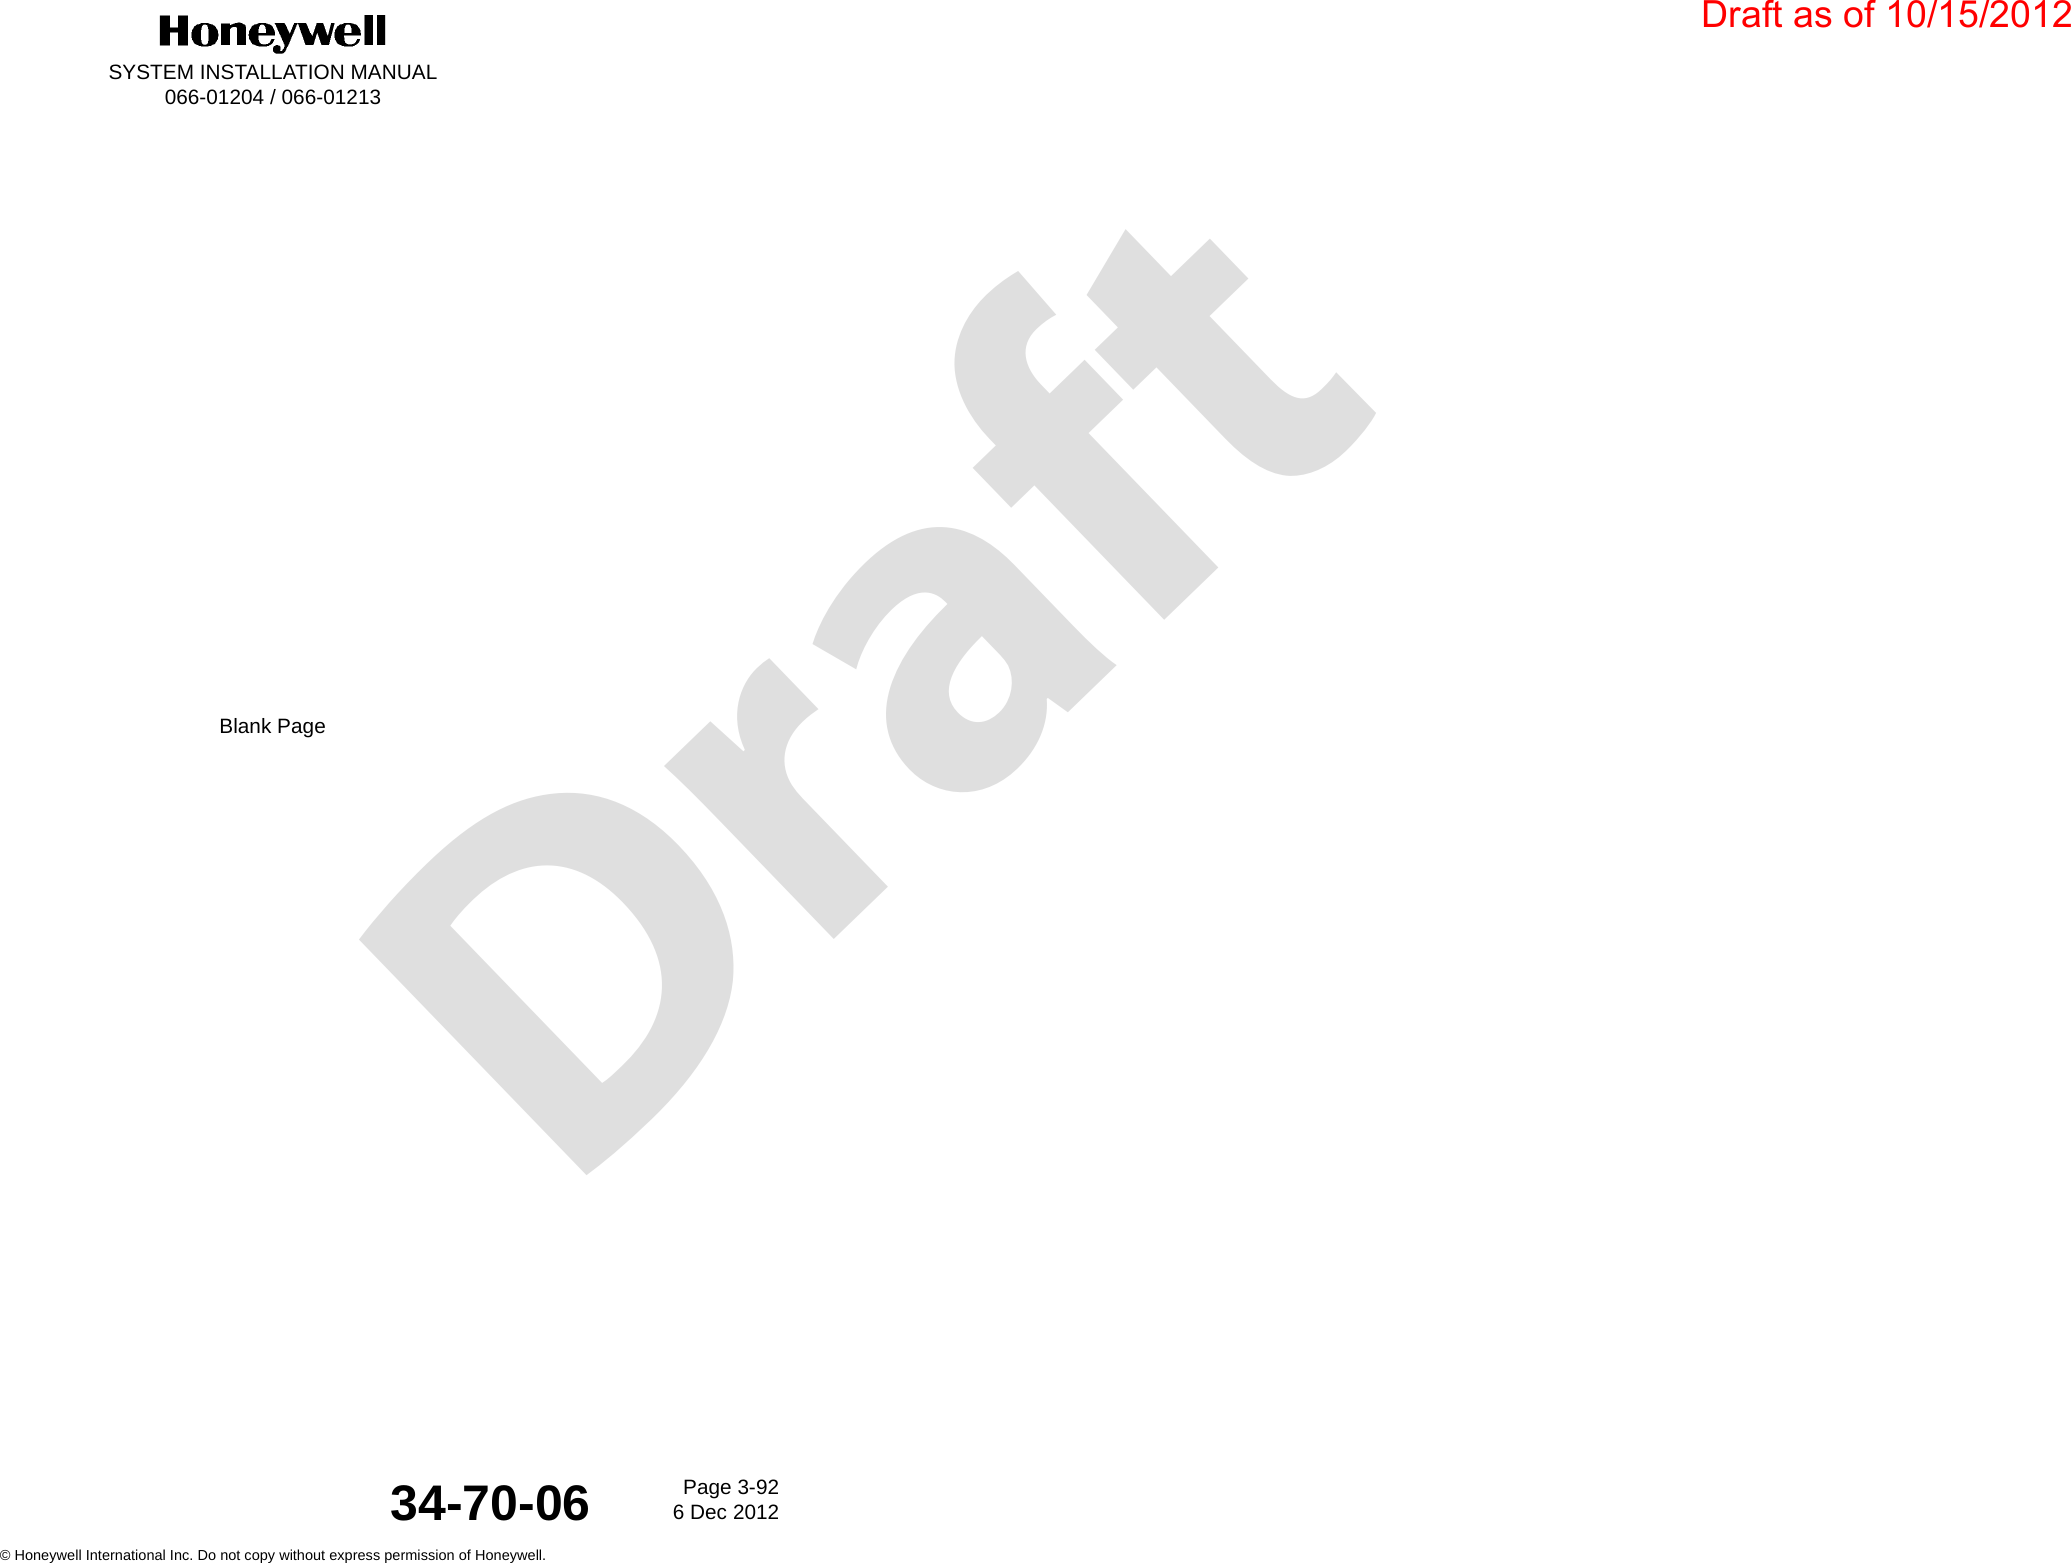 DraftSYSTEM INSTALLATION MANUAL066-01204 / 066-01213Page 3-926 Dec 2012© Honeywell International Inc. Do not copy without express permission of Honeywell.34-70-06Blank PageDraft as of 10/15/2012